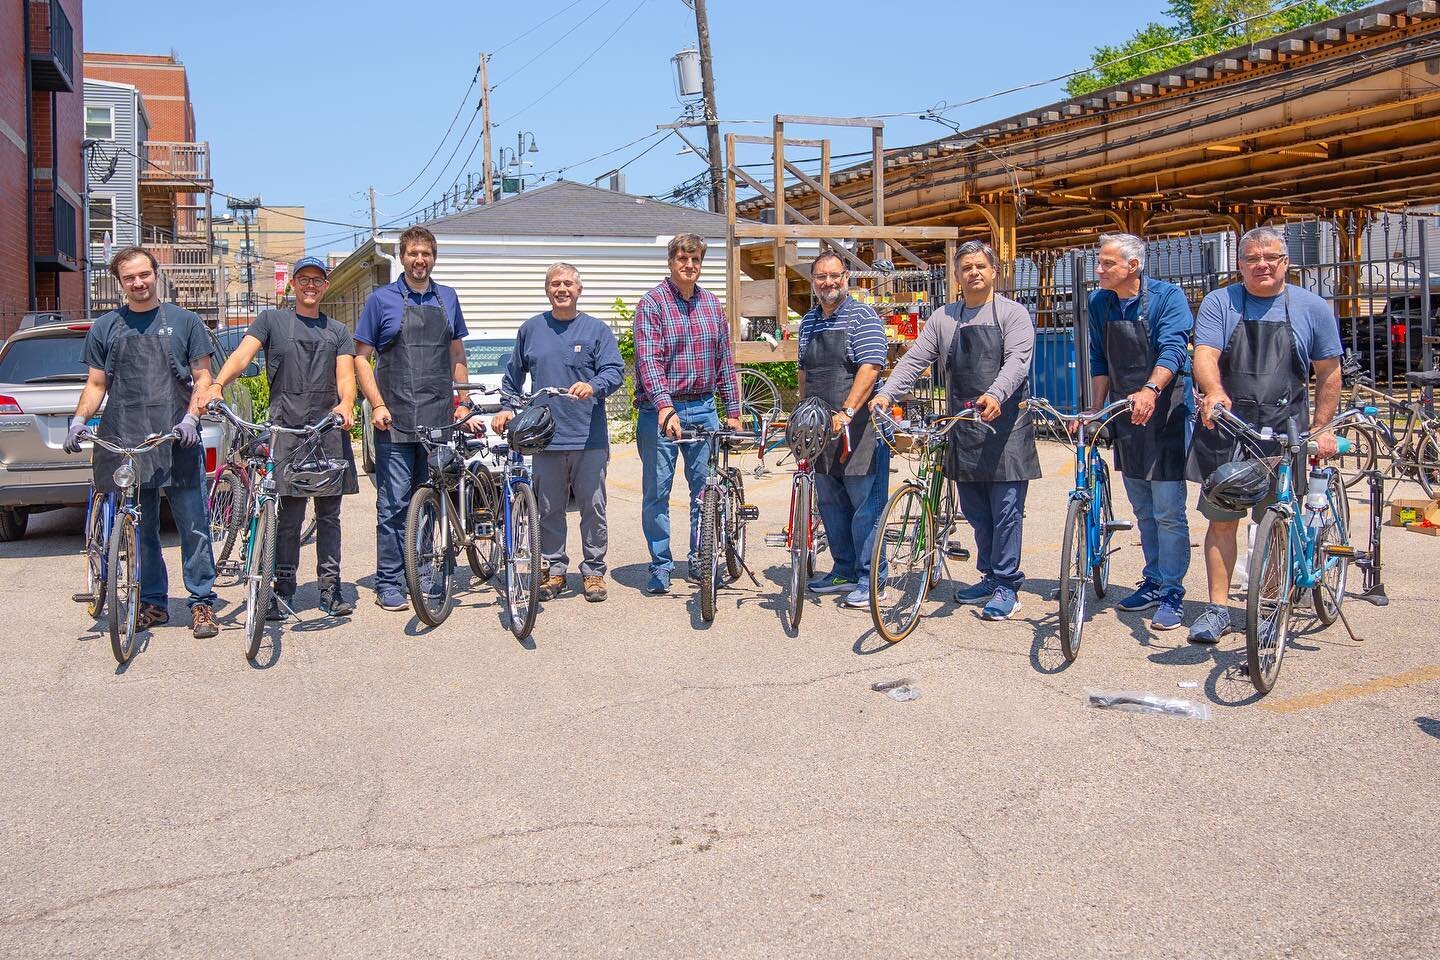 Had a huge turnout this Saturday with AHEPA as we flipped no less than 10 bikes ready to go outfitted with helmets, lights and locks! Thanks to all who joined, donated bikes, and donated funds. All these contributions go towards getting a bike into t